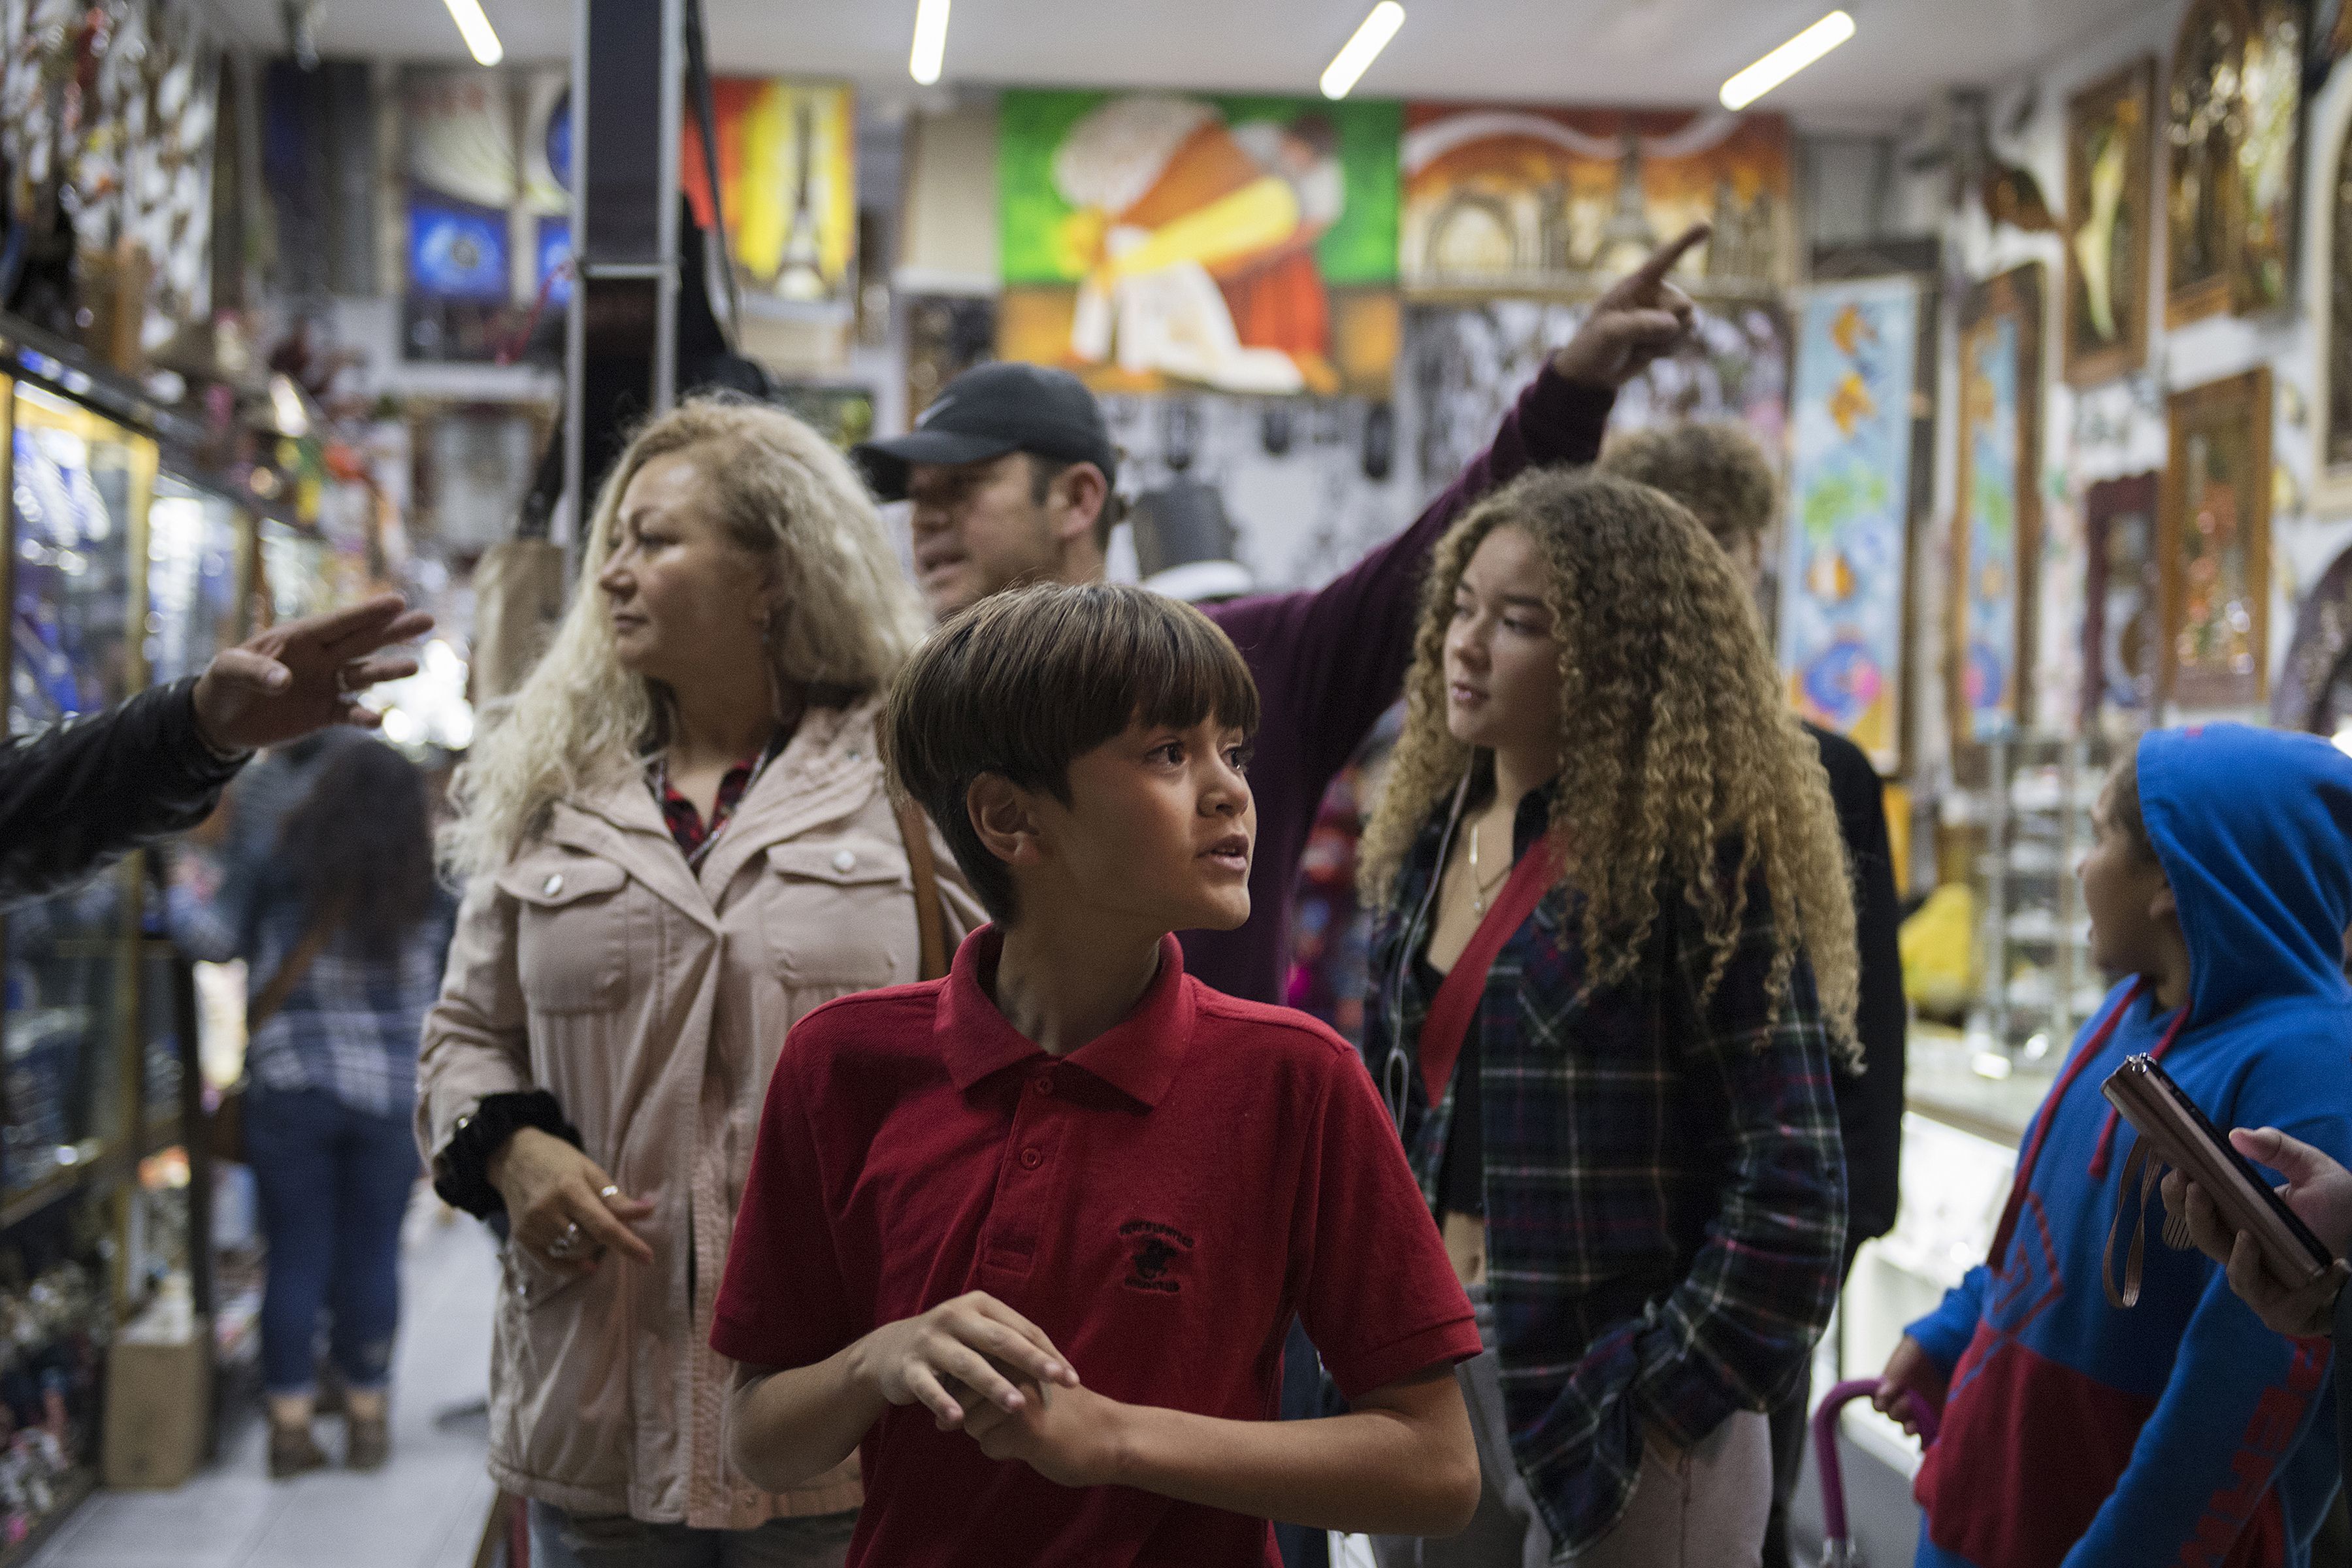 Edward Flores, 12, foreground, joins members of his family as they get directions from a shop owner on Avenida Revolucion in downtown Tijuana on Saturday, Nov. 30, 2019. With money in short supply and safety concerns for the children, the family rarely gets to make shopping trips. Image by Amanda Cowan. Mexico, 2019.